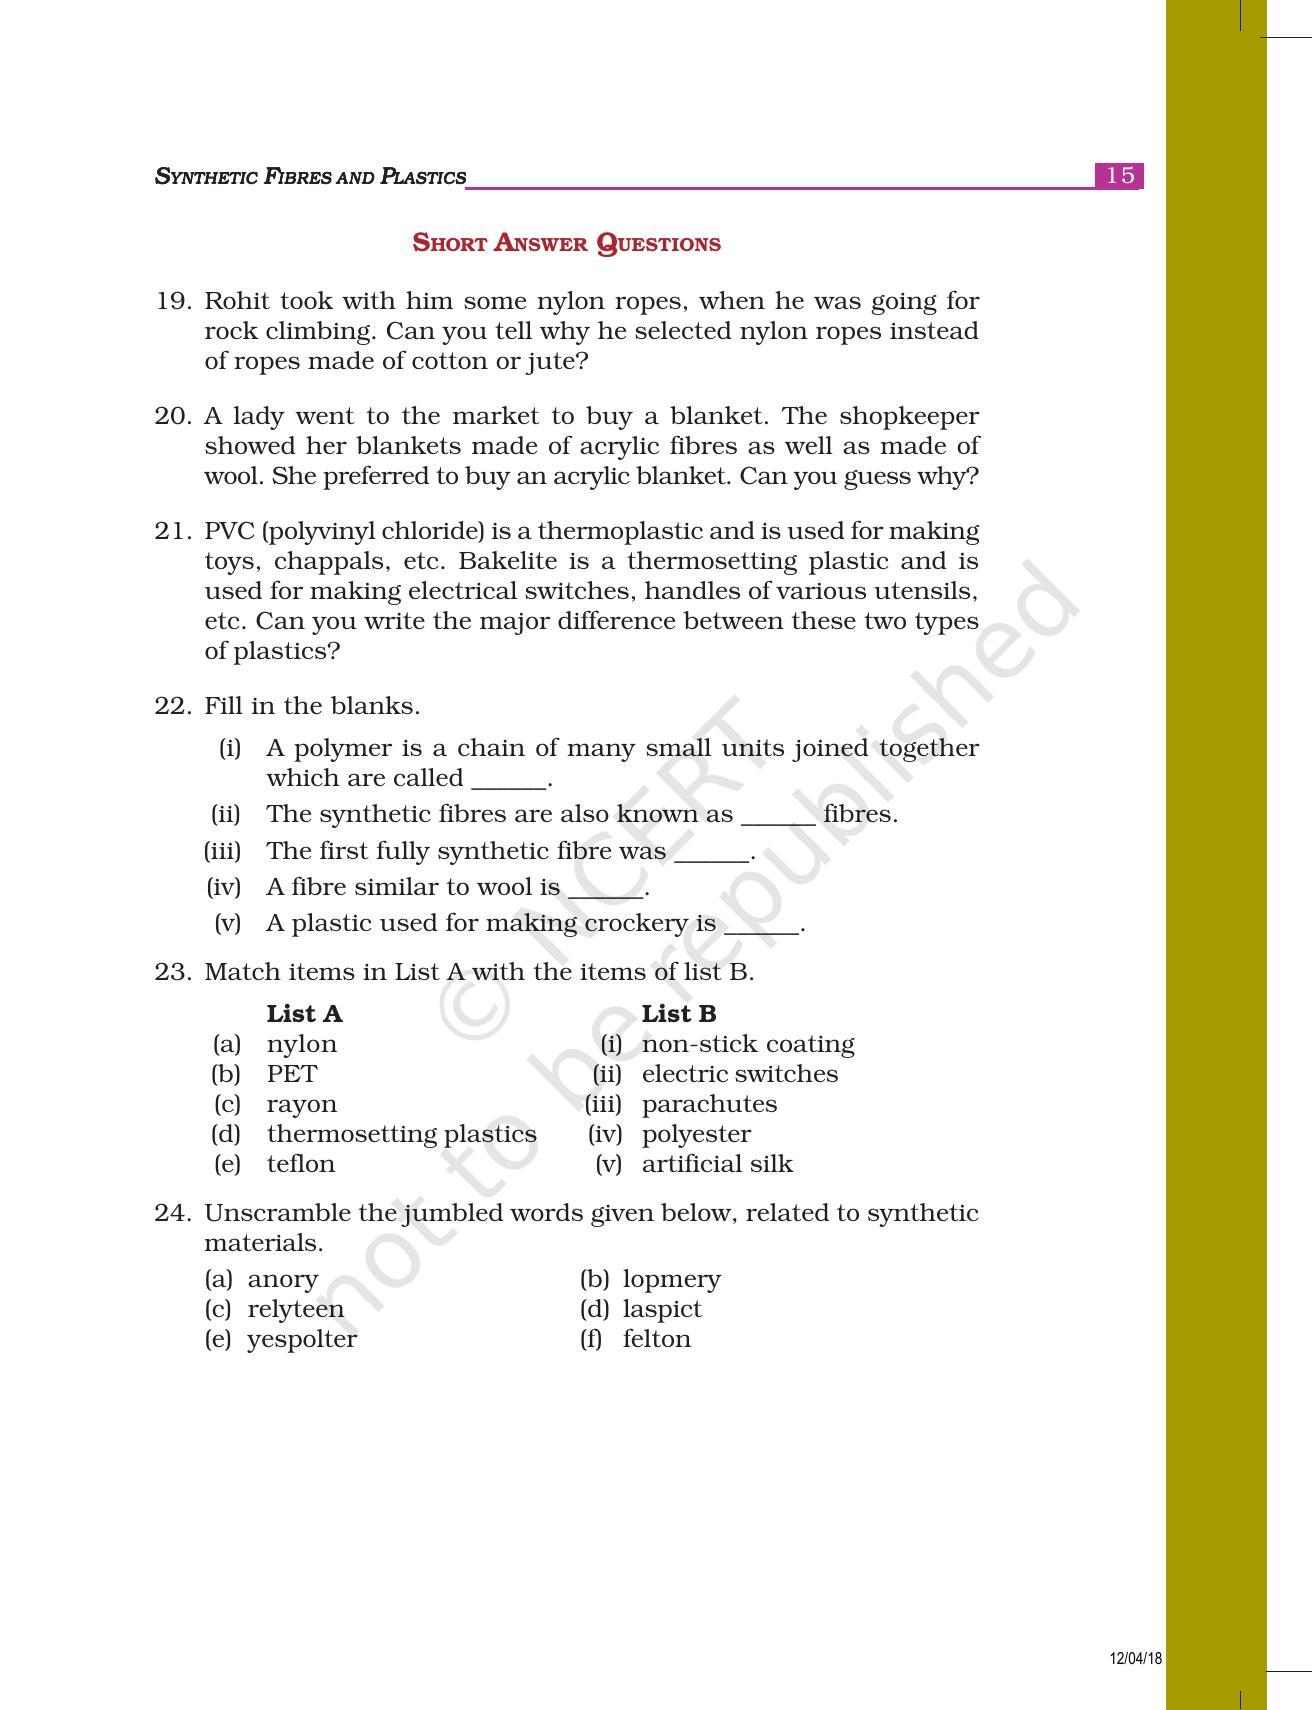 NCERT Exemplar Book for Class 8 Science: Chapter 3- Synthetic Fibres and Plastics - Page 3